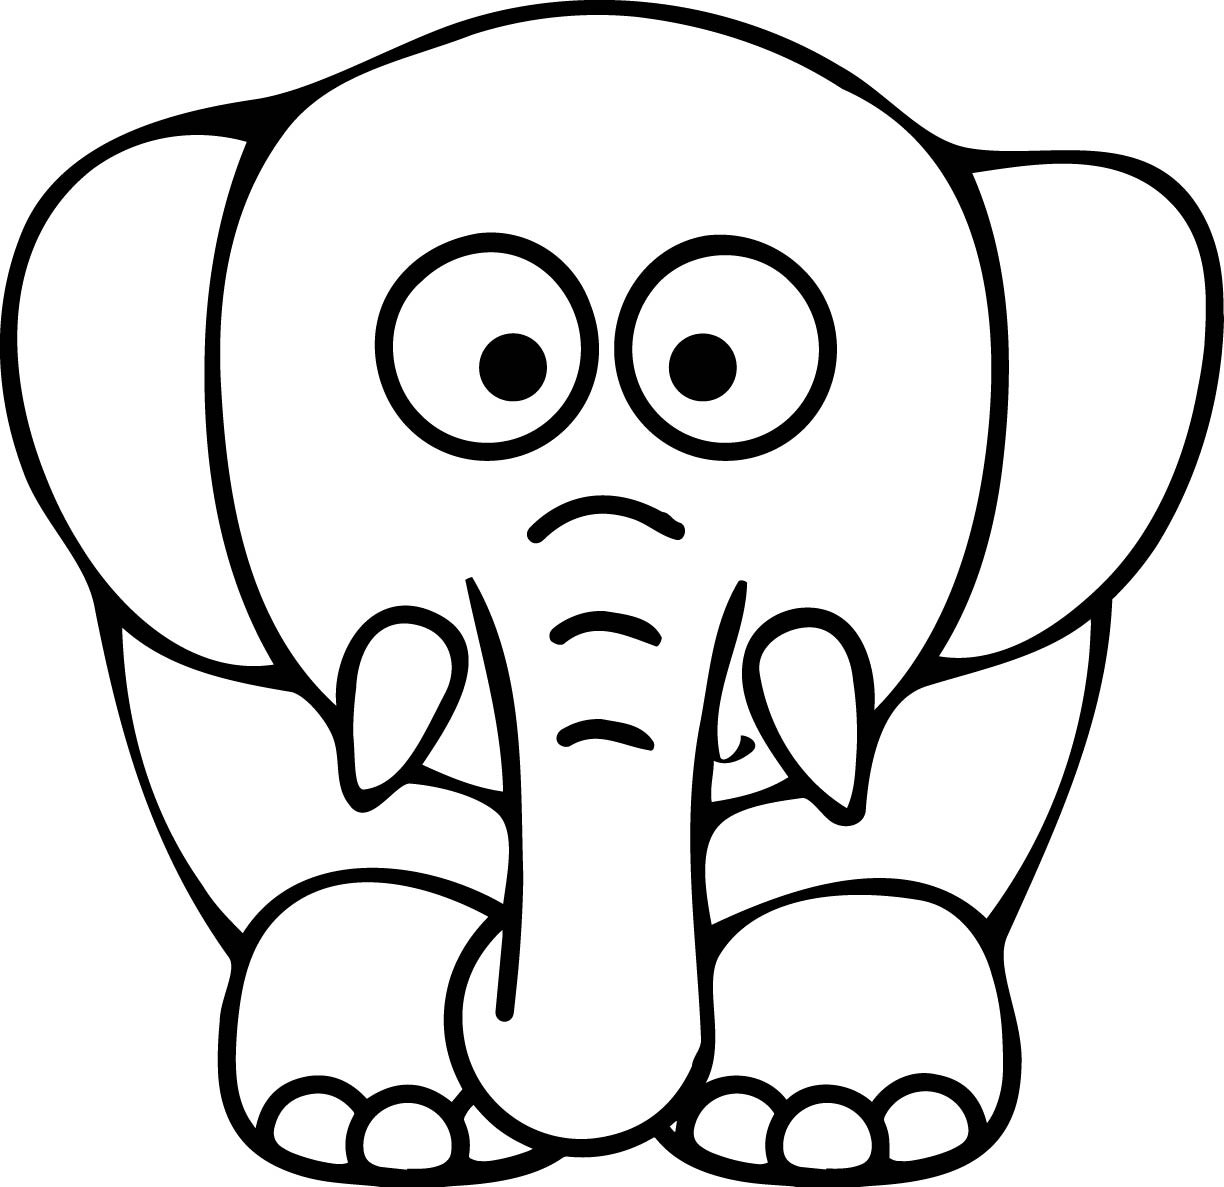 Elephant Coloring Sheet
 Black beauty 18 Elephant coloring pages